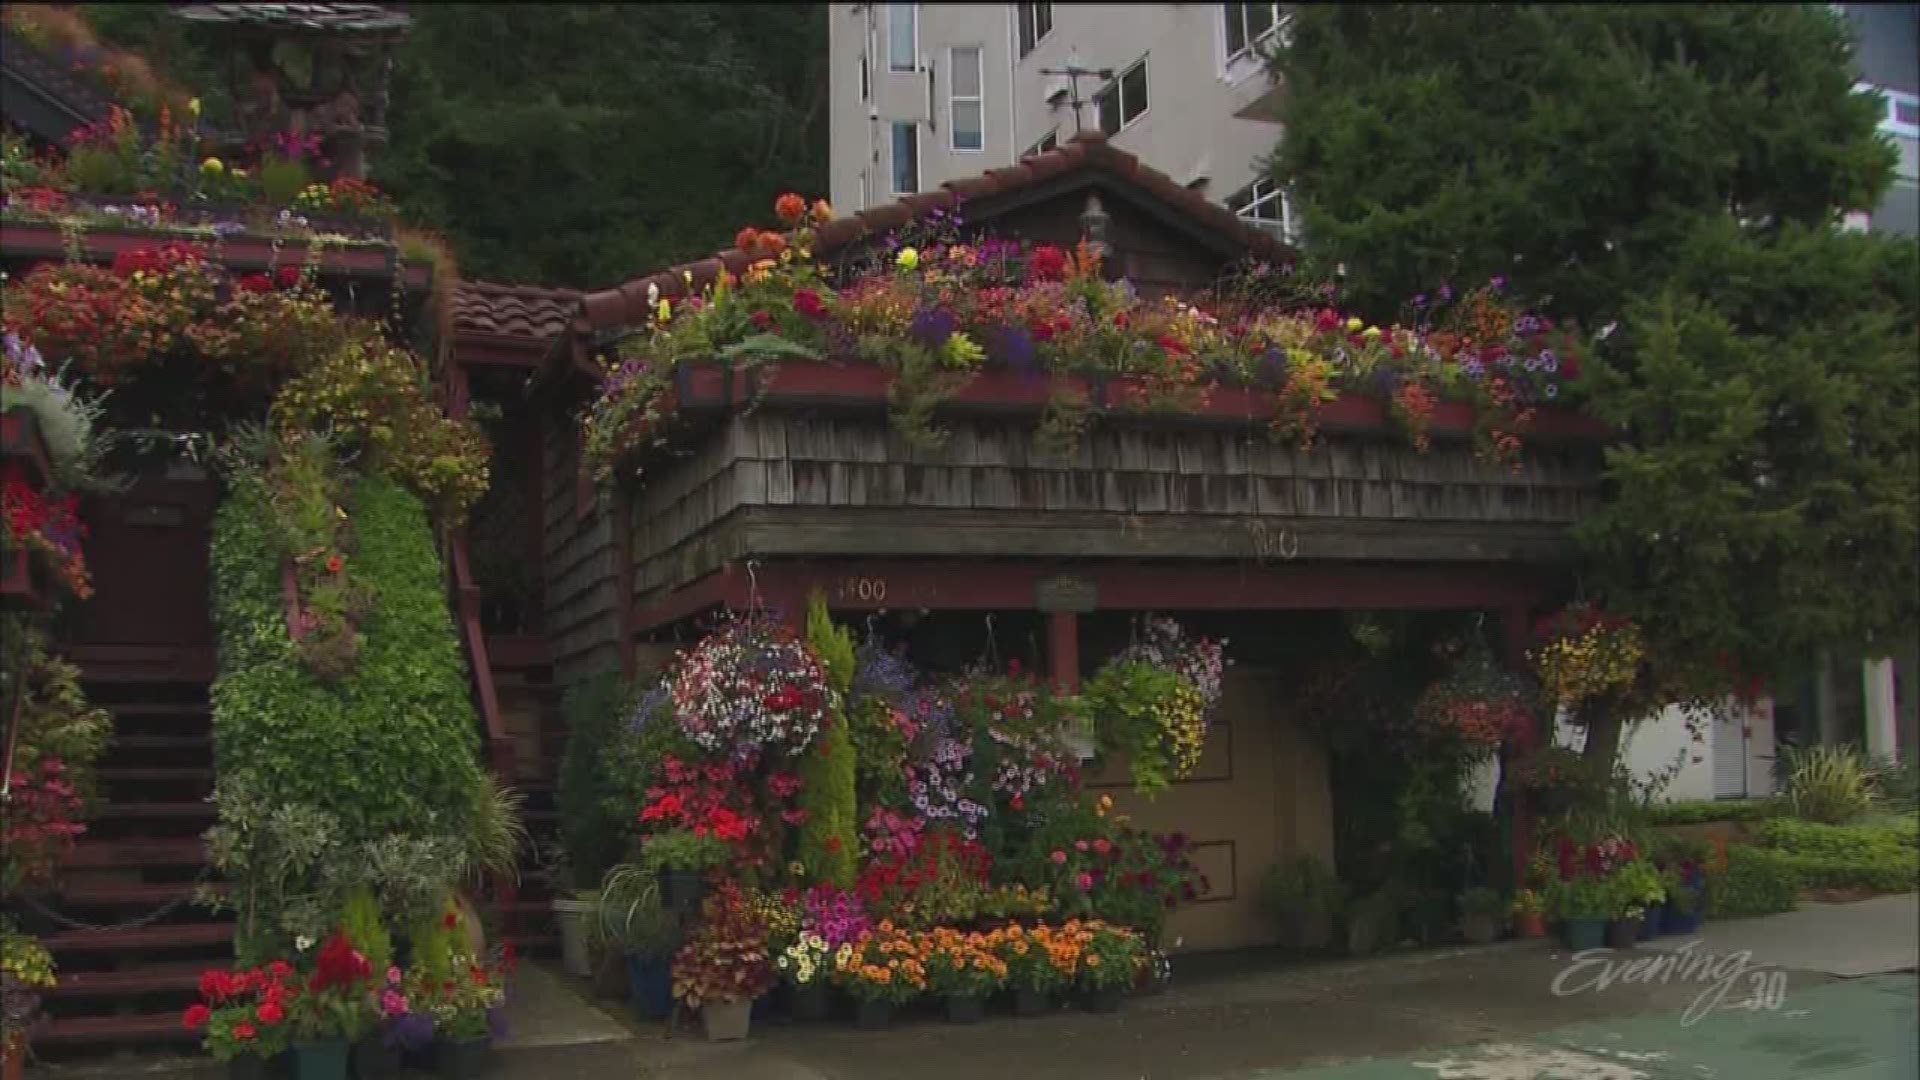 The world's flower house on Alki-woman gets visitors from all over the globe to see her two houses bursting with blooms